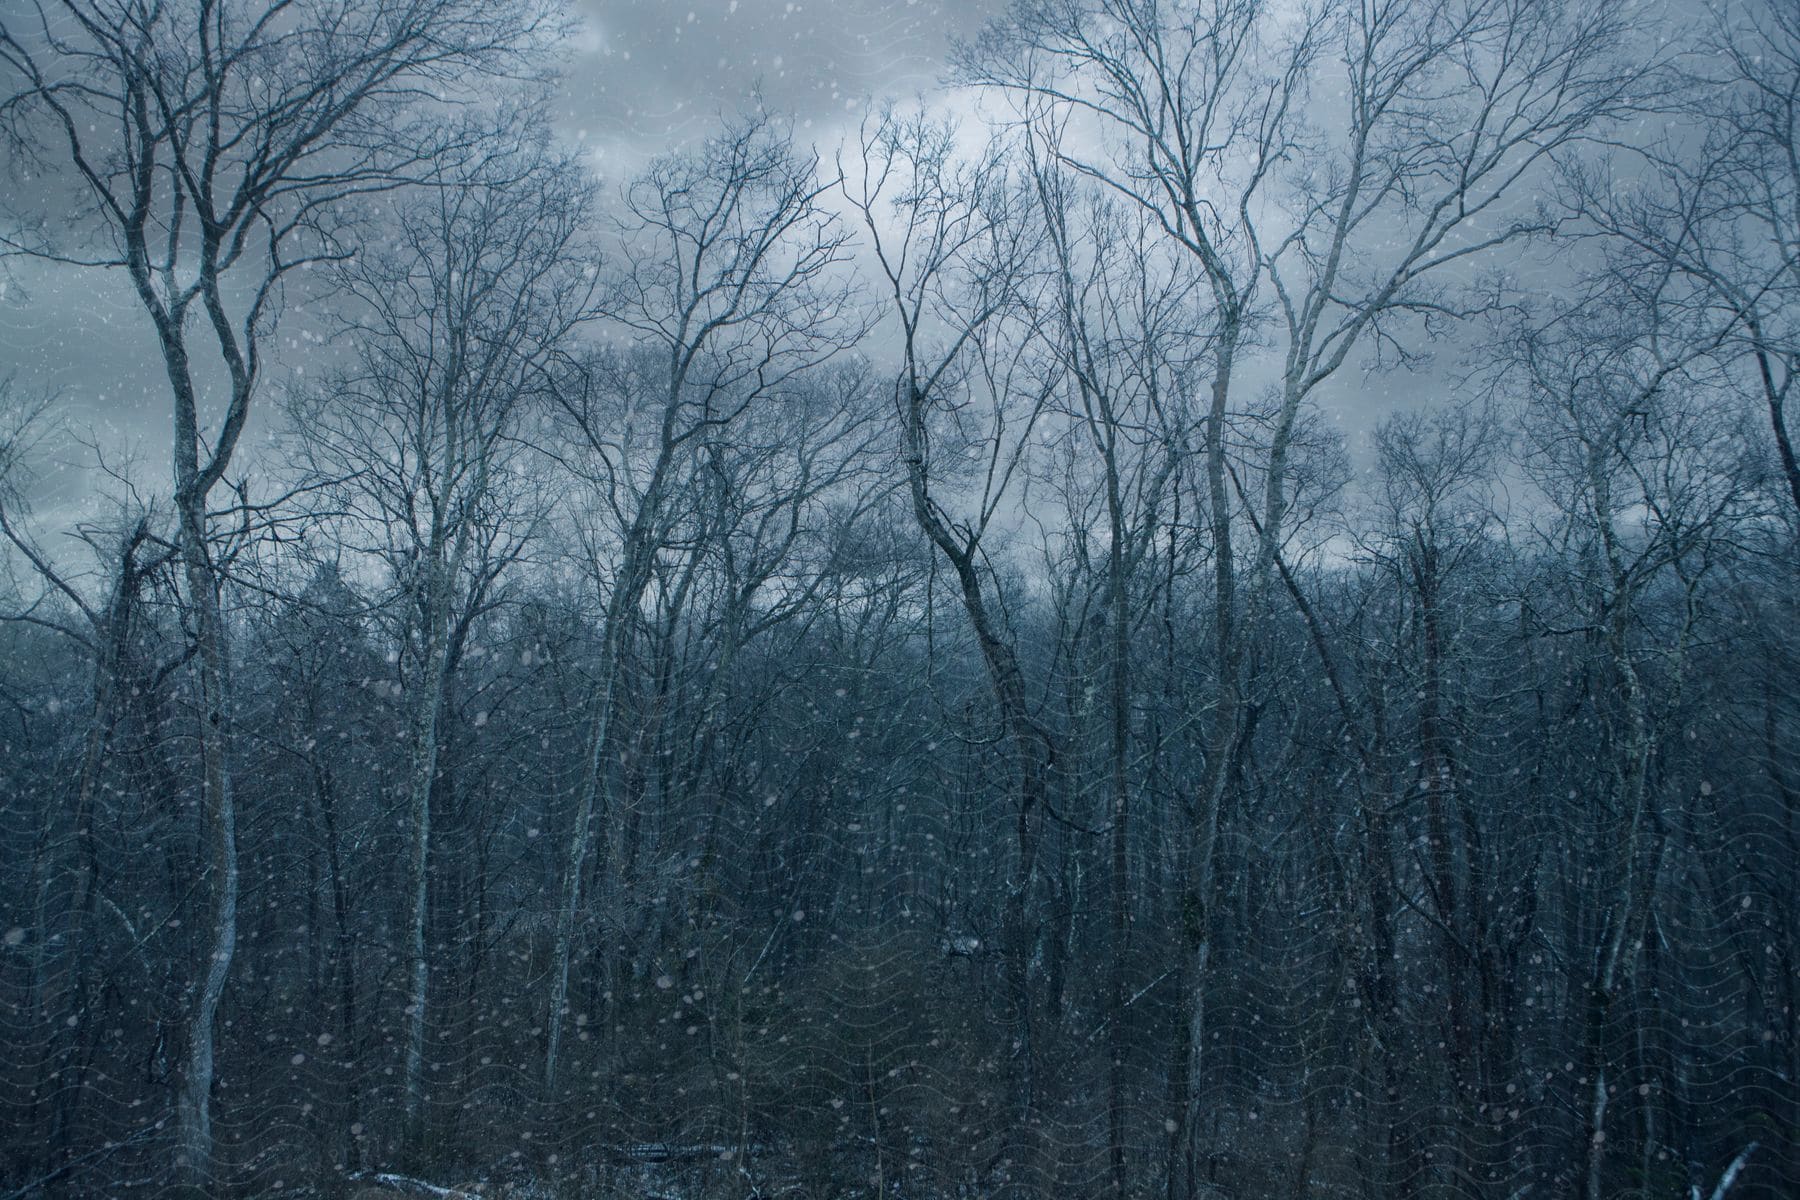 Snow falling over bare trees in a forest under an overcast sky